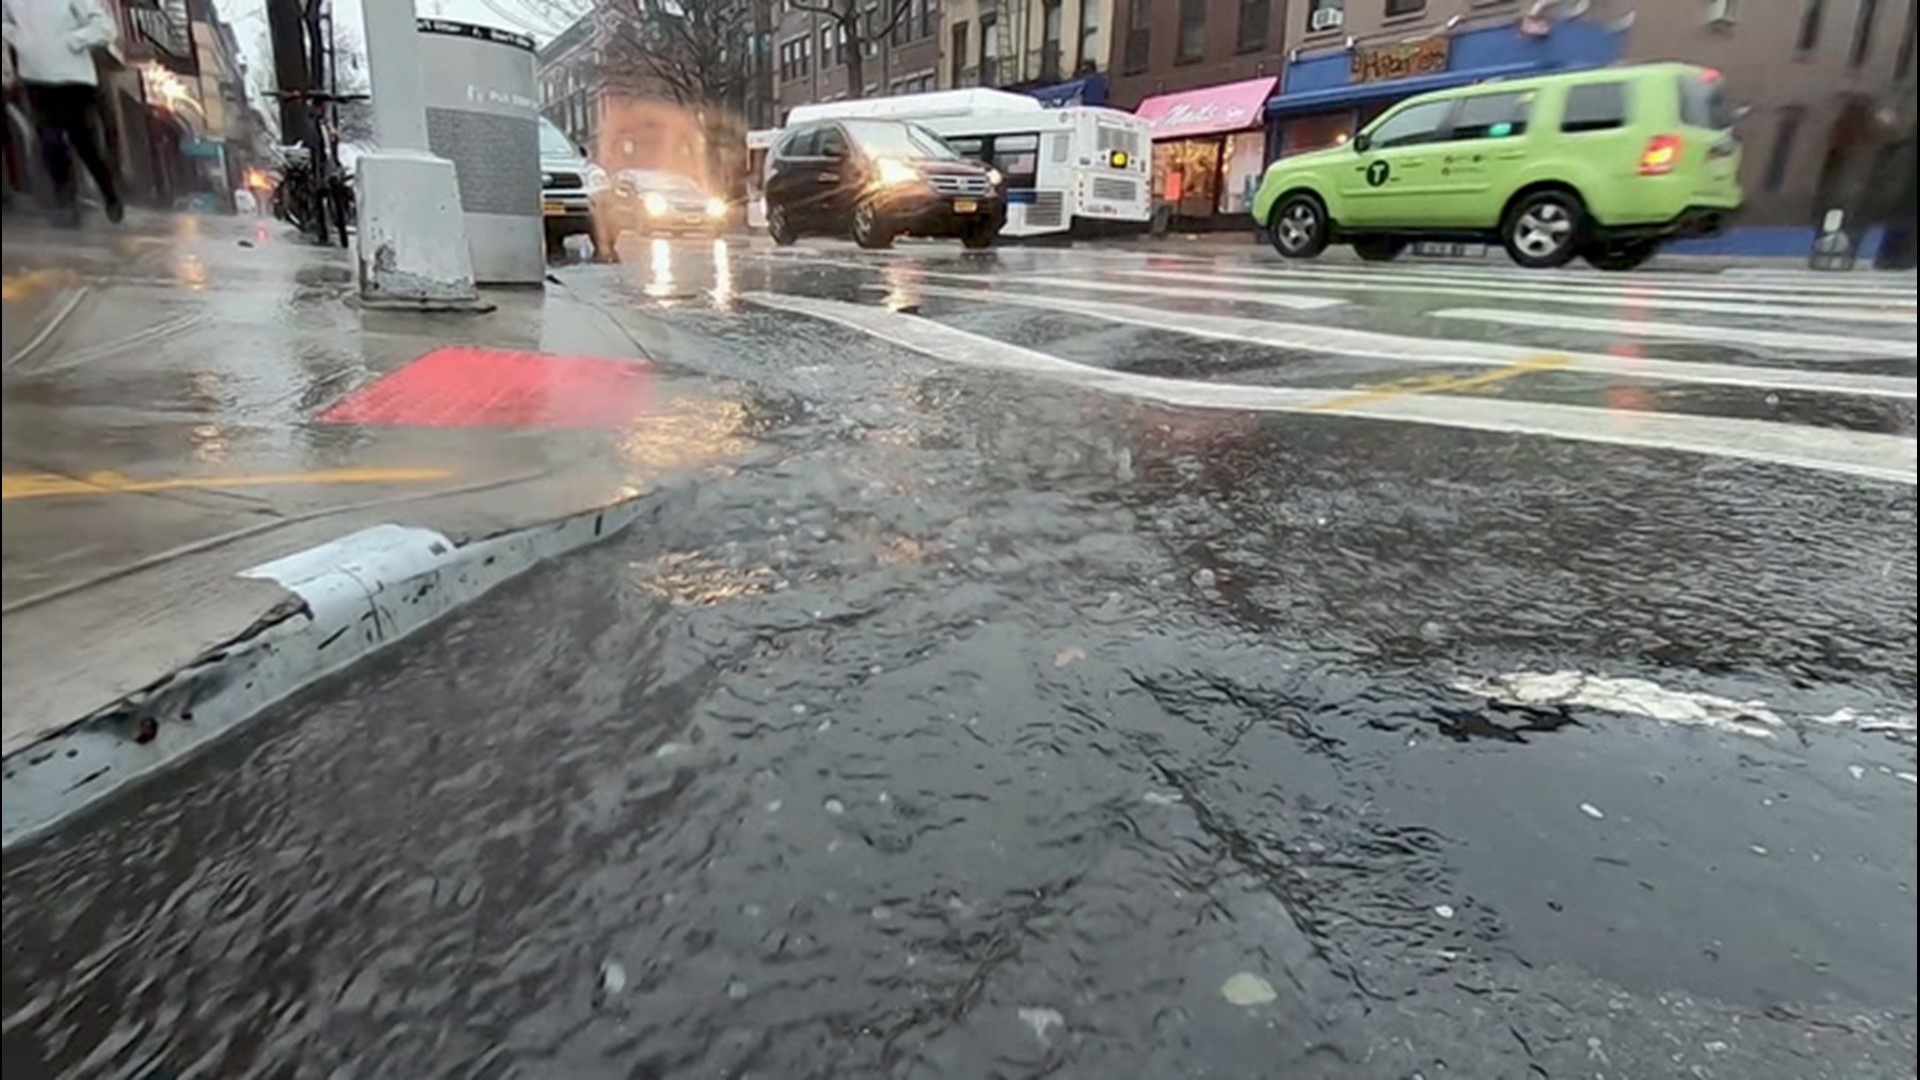 Residents of New York City were left soaking wet on Jan. 25 as a torrential rainstorm swept over the city.